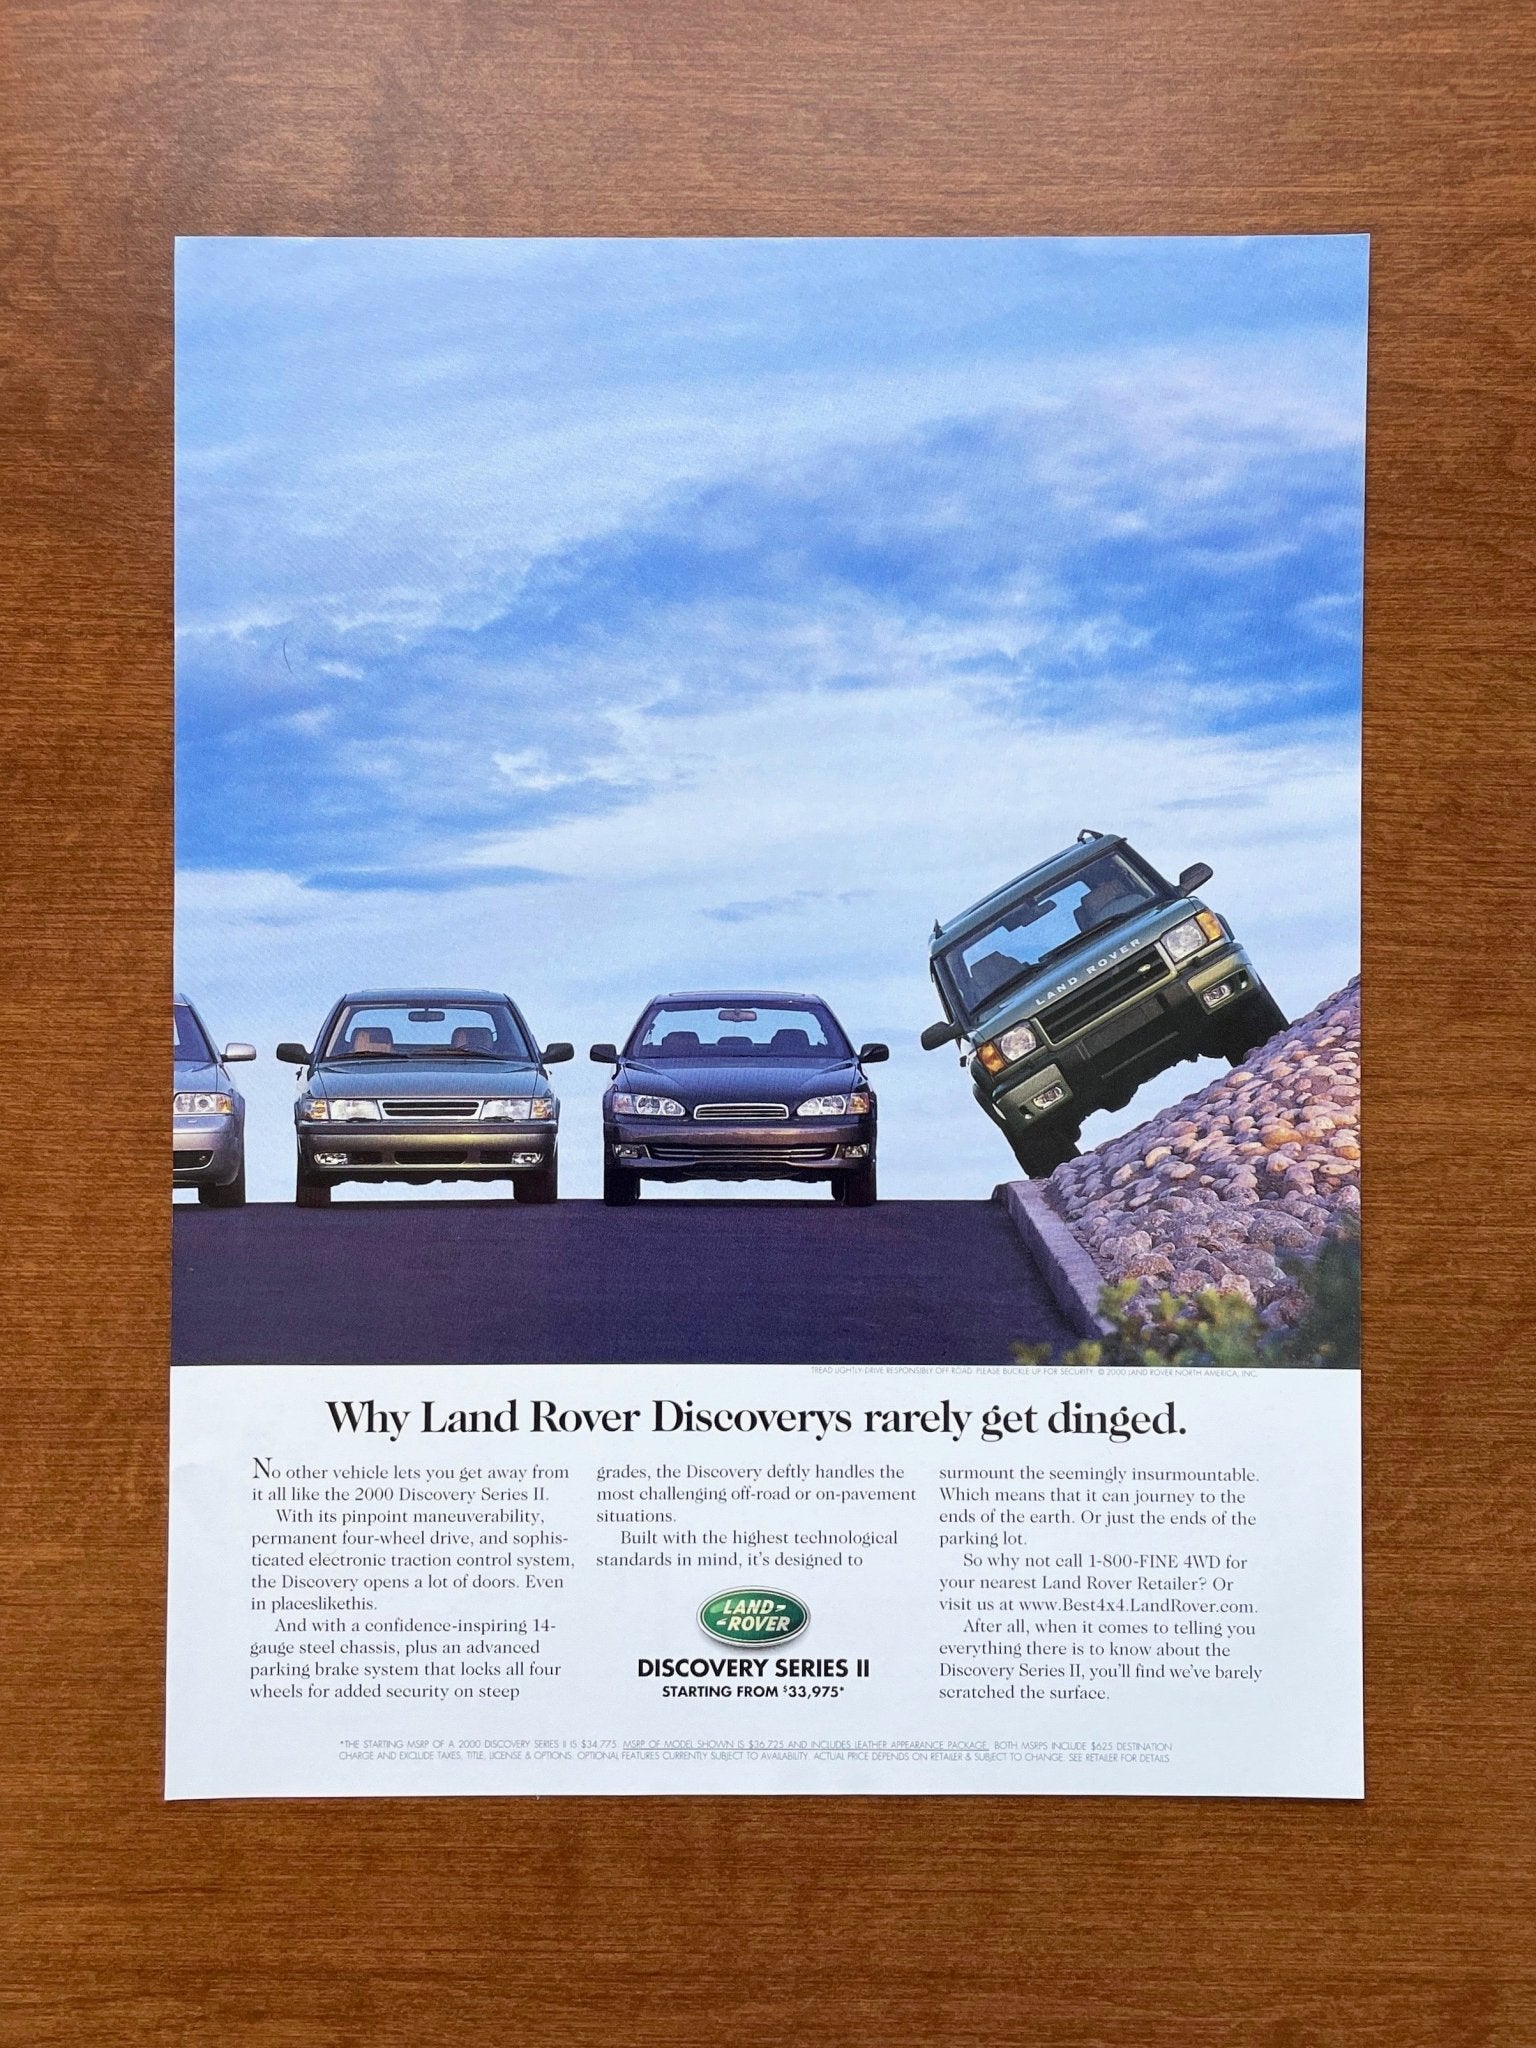 2000 Discovery Series II "rarely get dinged." Advertisement